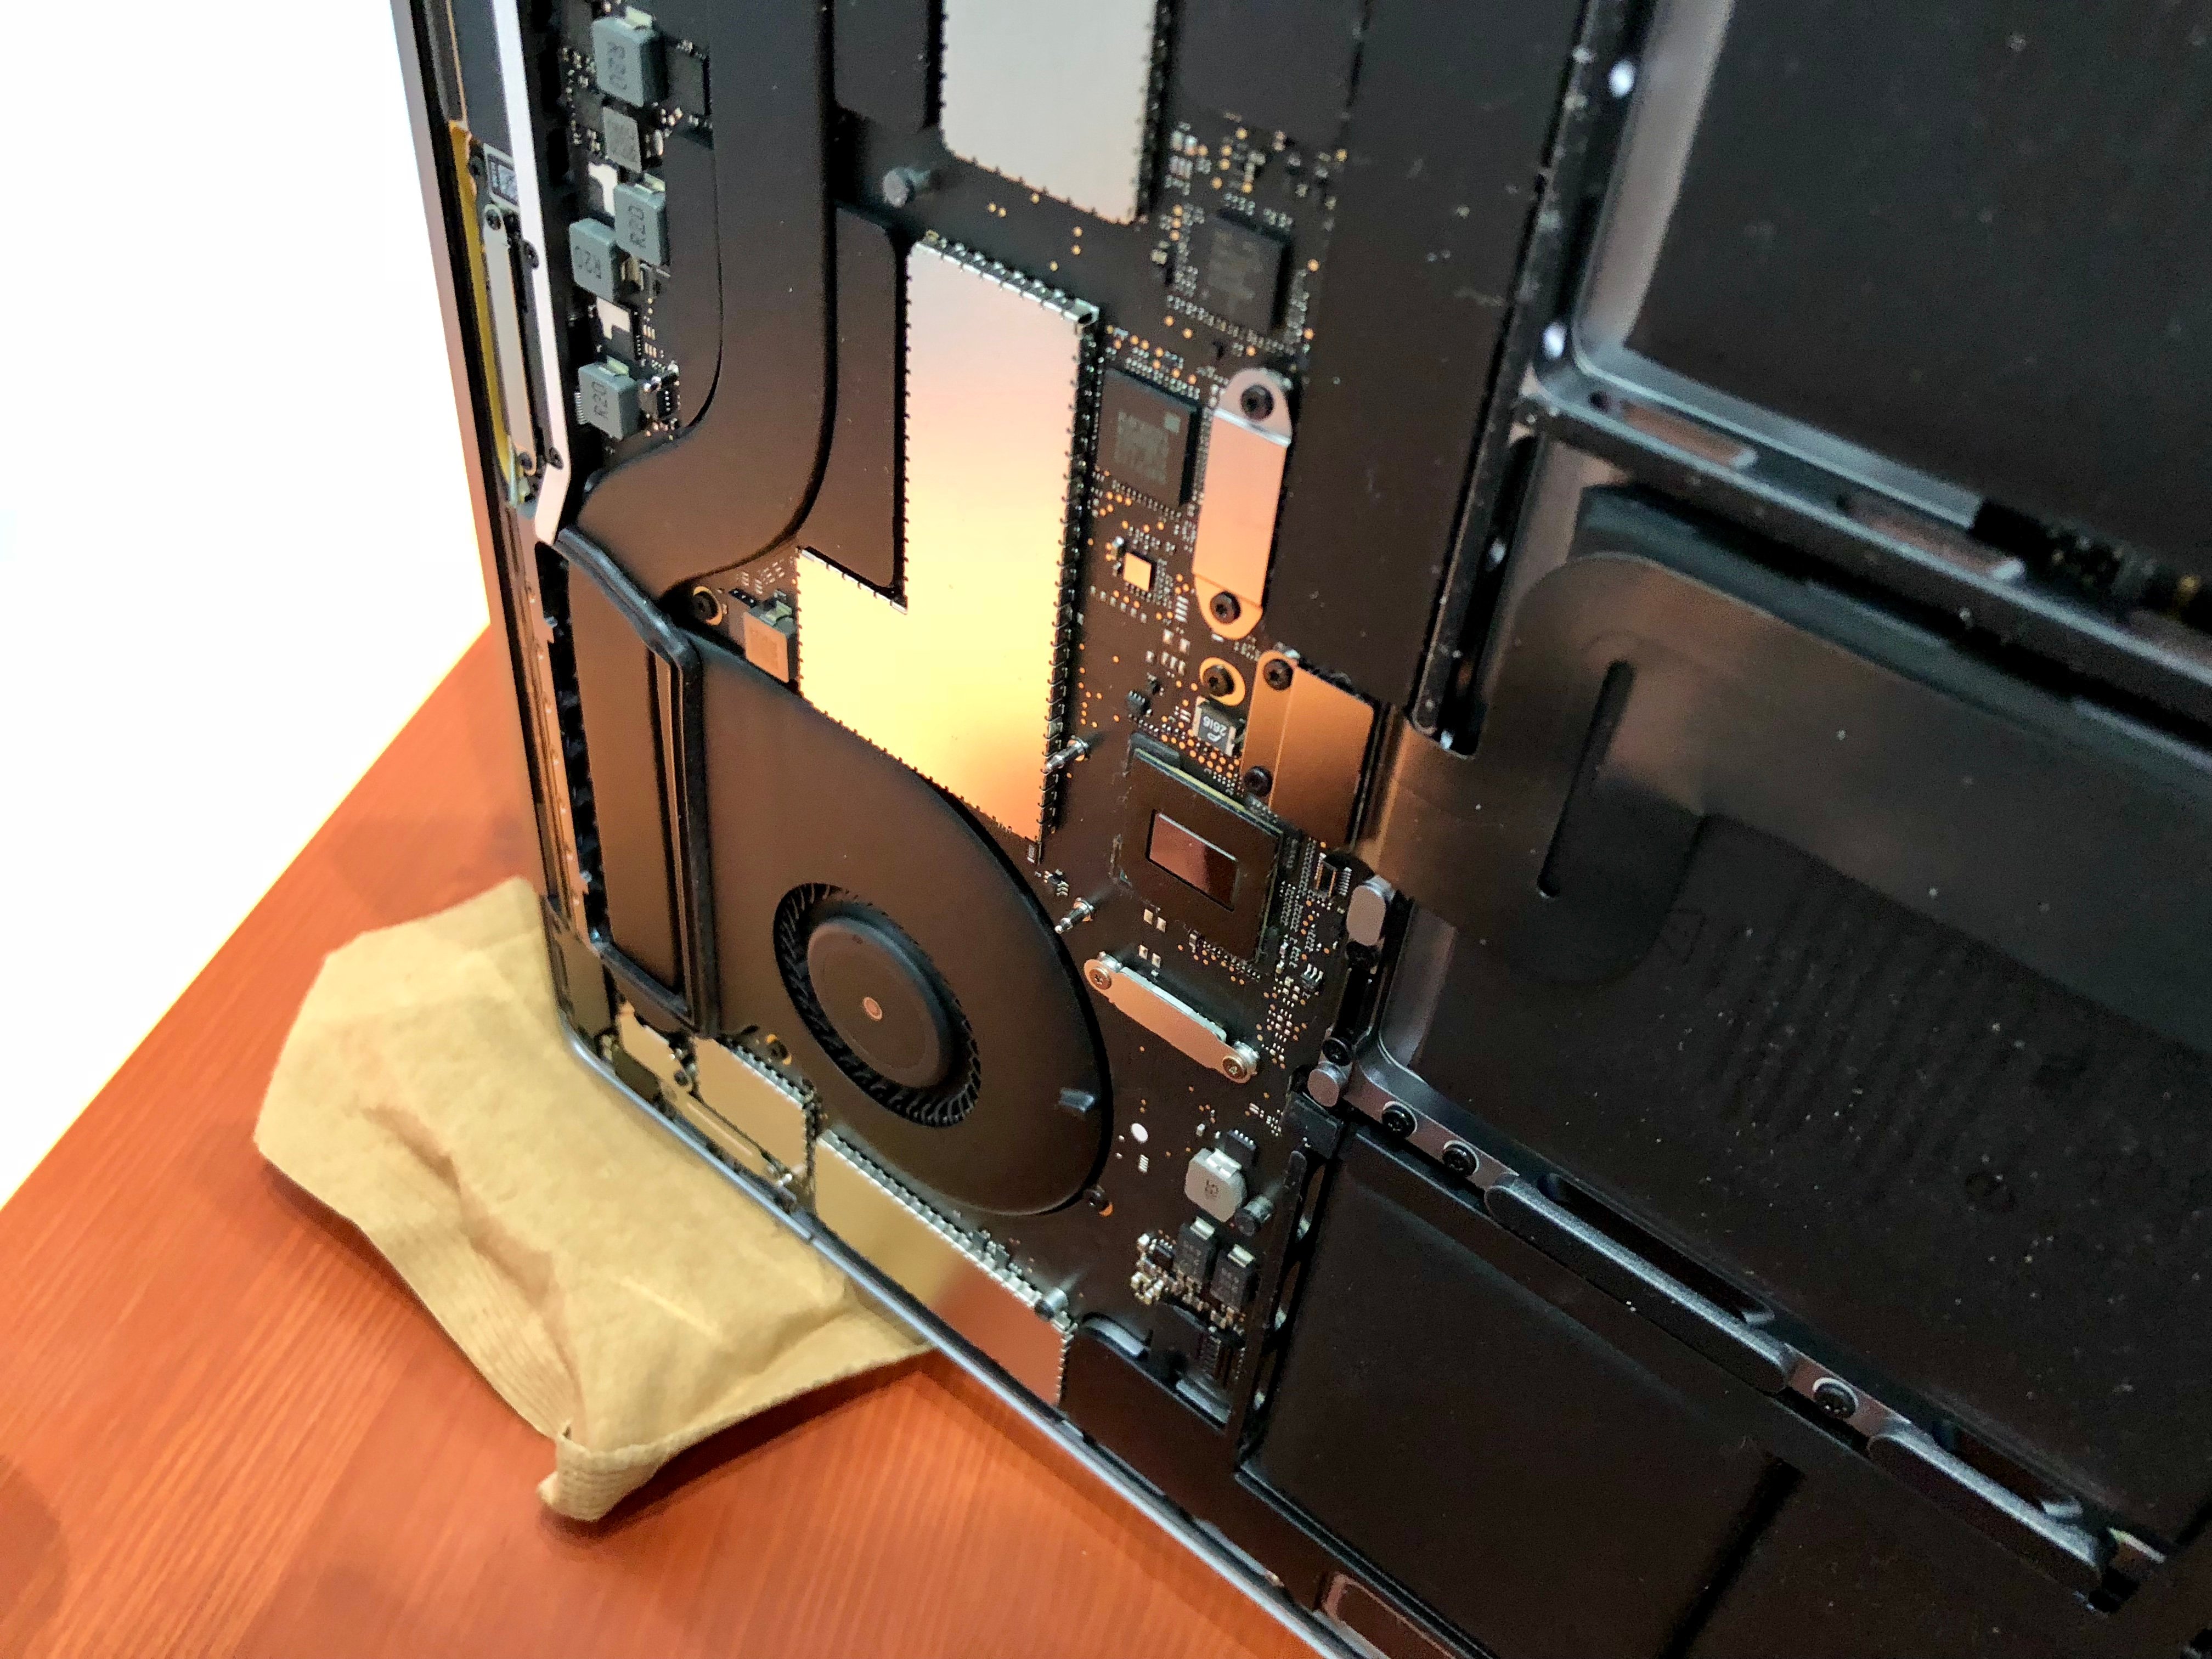 Act fast to save your MacBook from water damage.